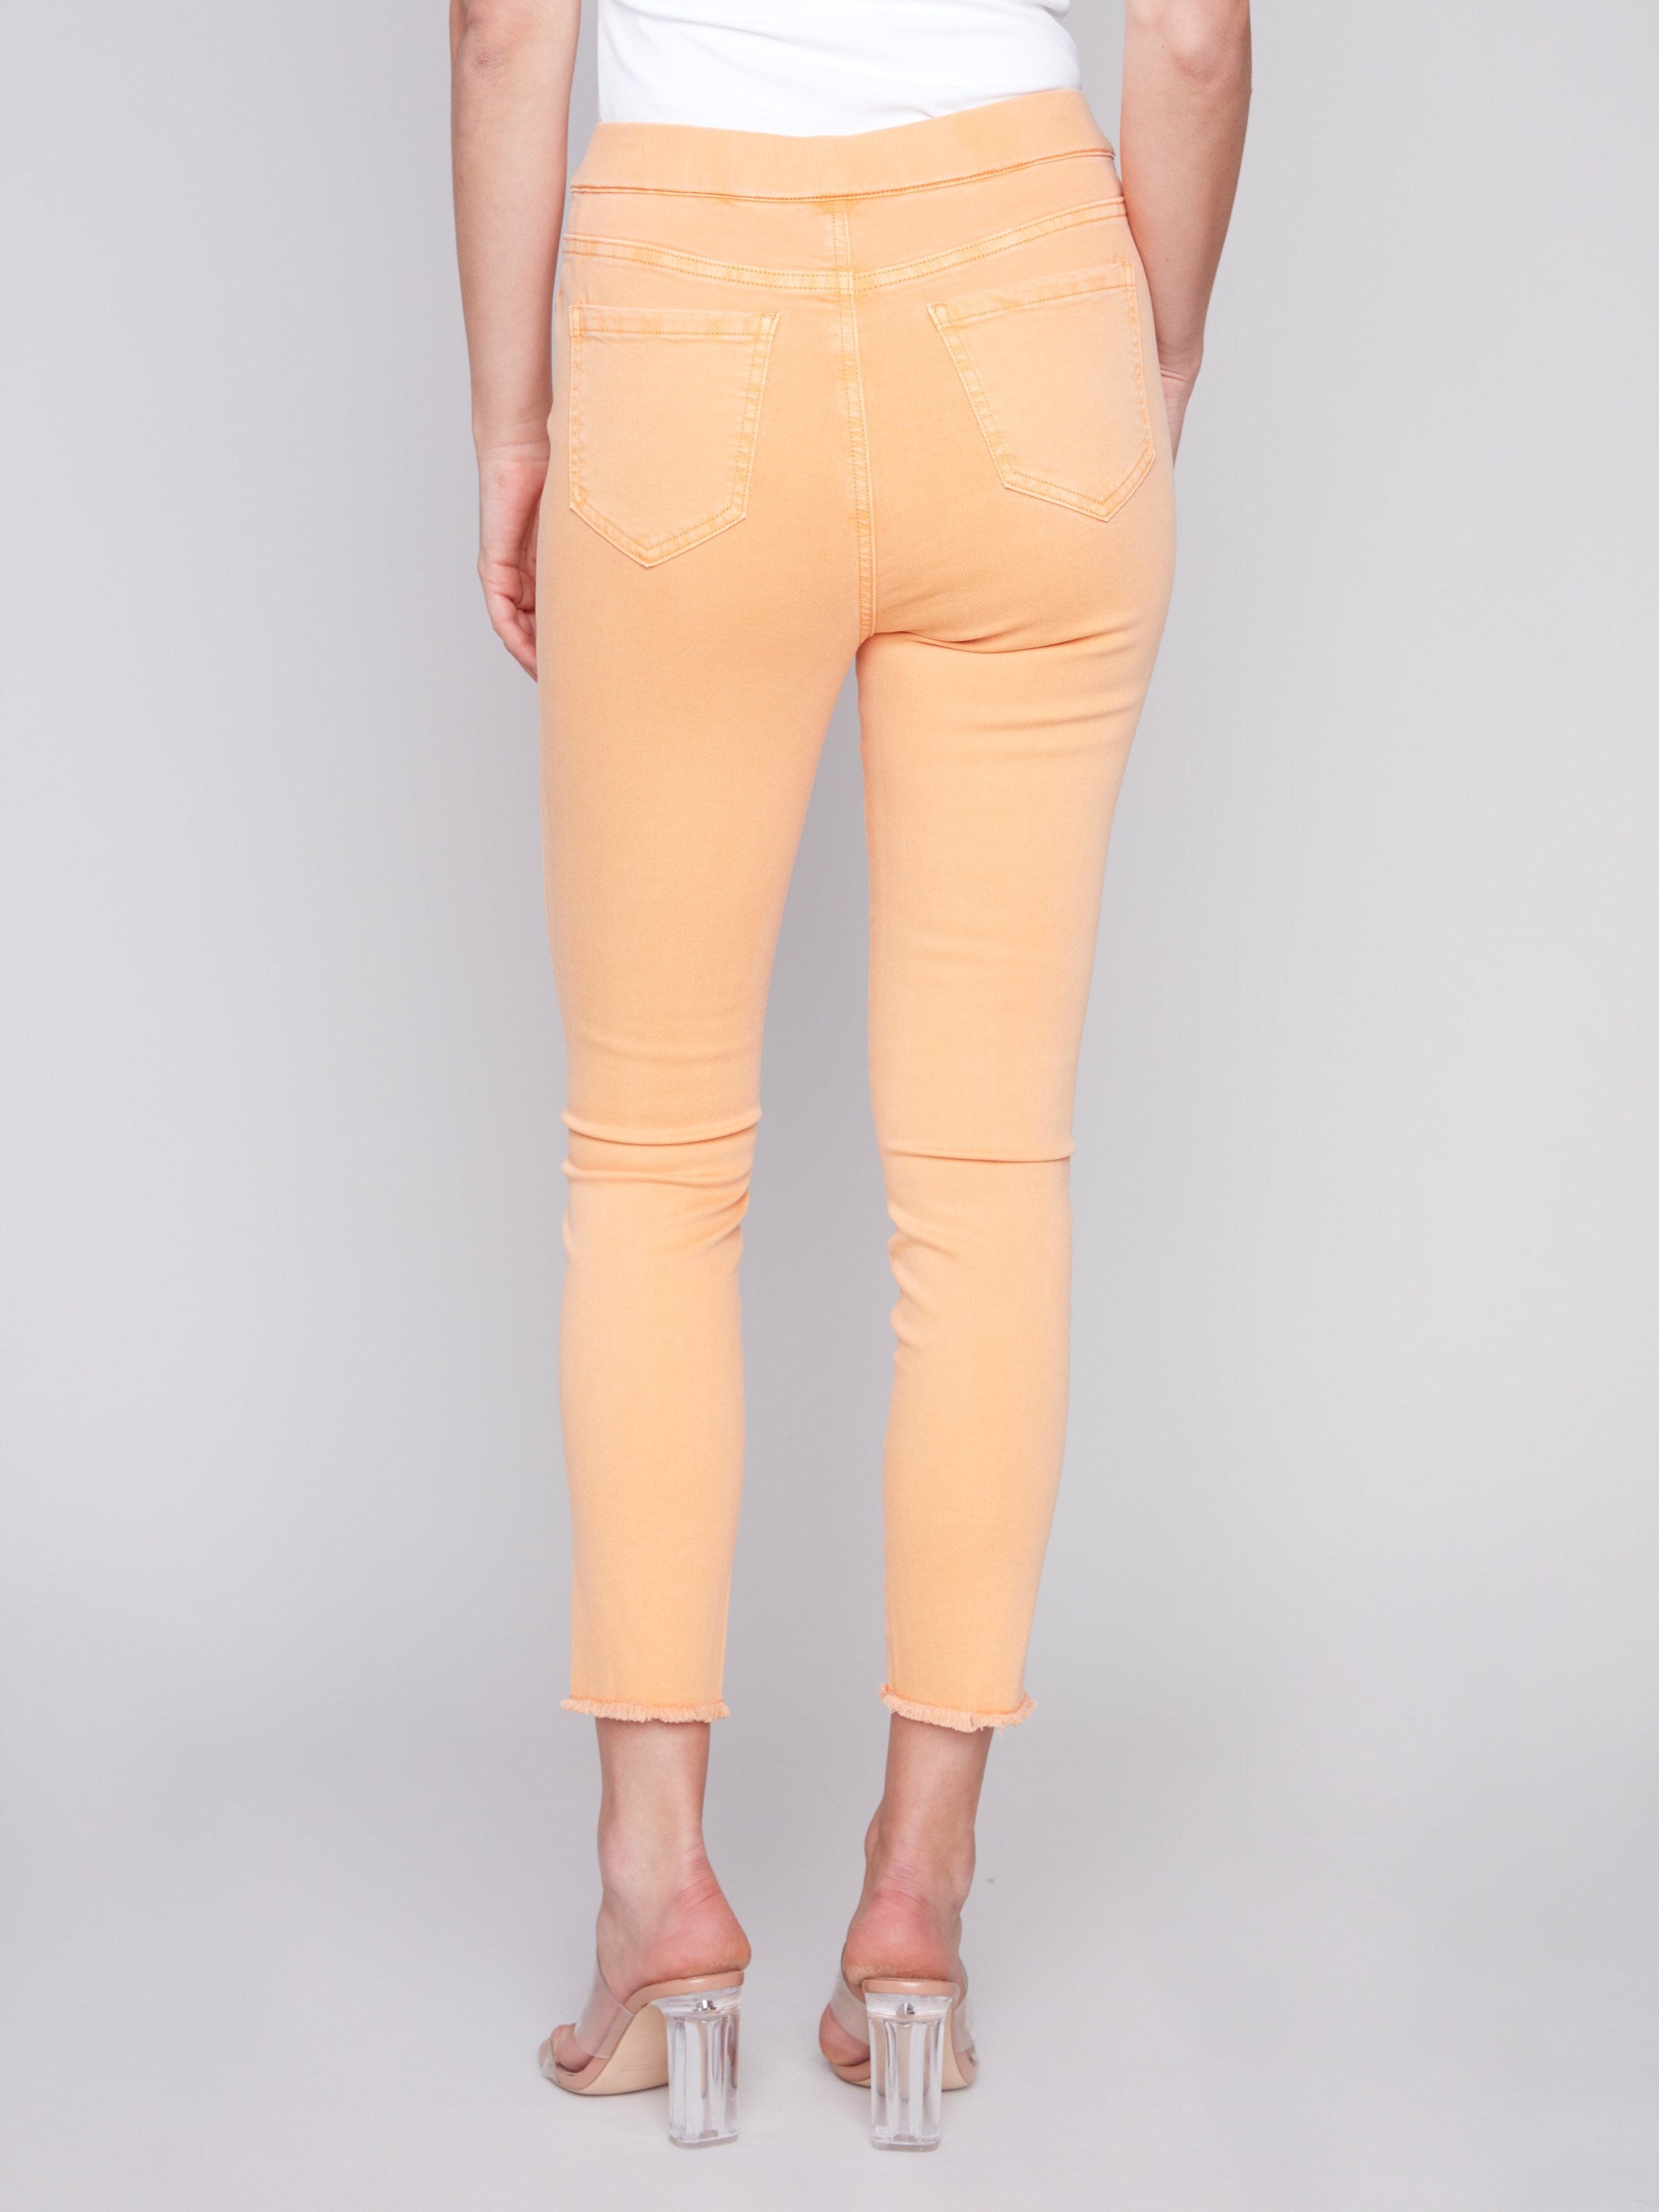 Pull-On Twill Pants with Split Hem - Melon - Charlie B Collection Canada - Image 3